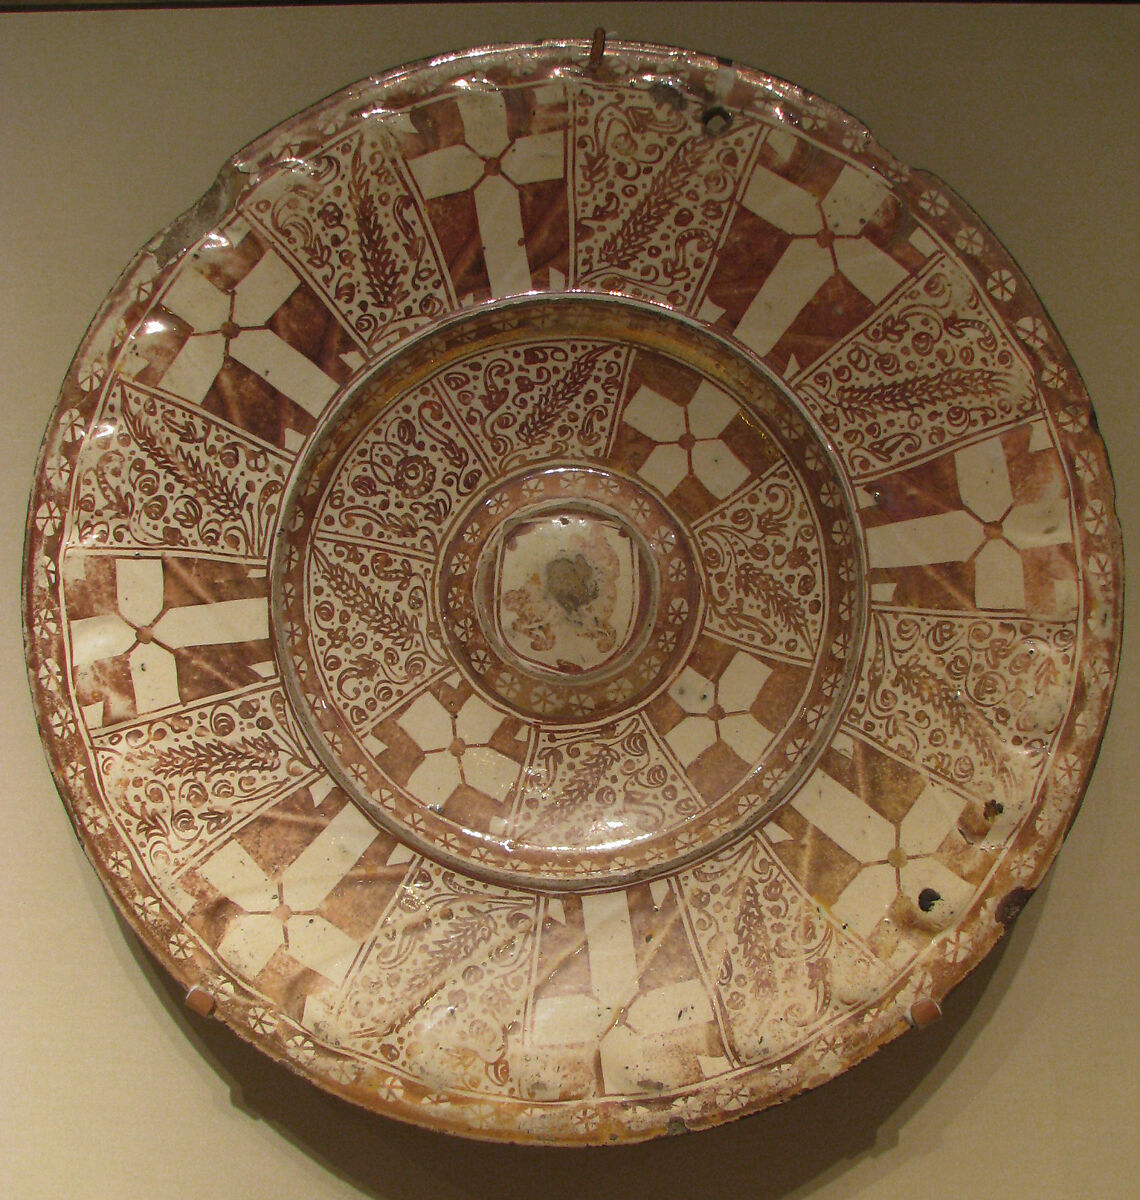 Plateau, Tin-glazed and luster-painted earthenware, Spanish, Valencia 